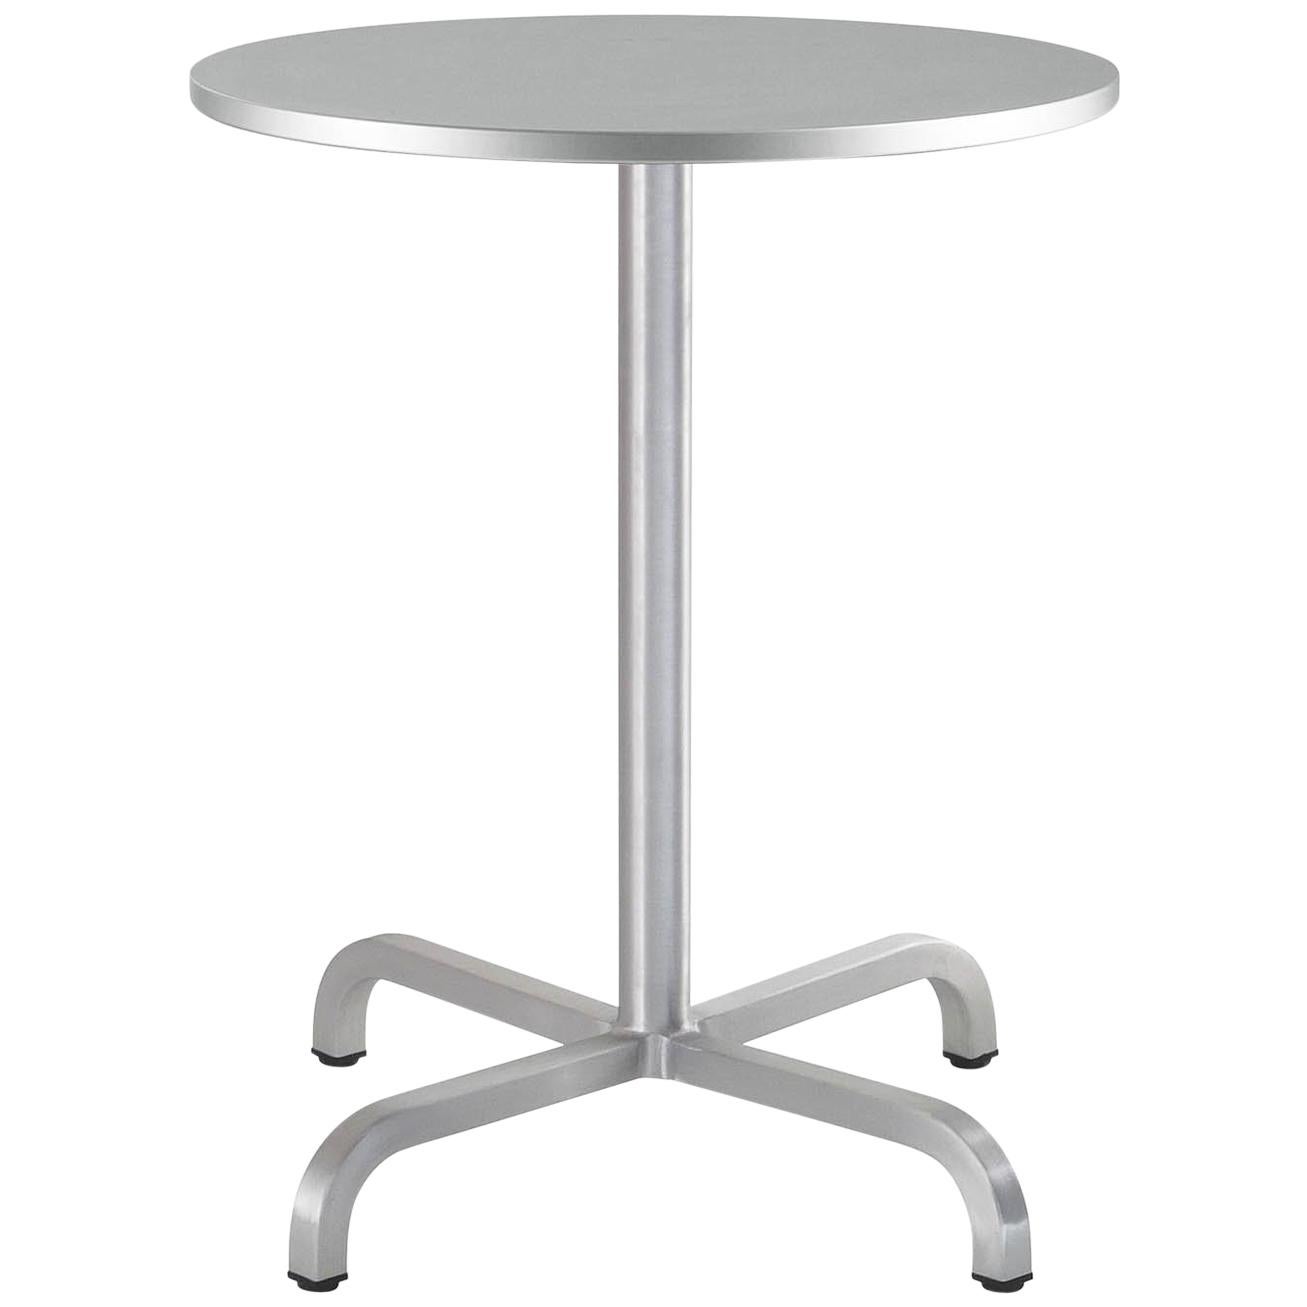 Emeco 20-06 Small Round Café Table with Gray Laminate Top by Norman Foster